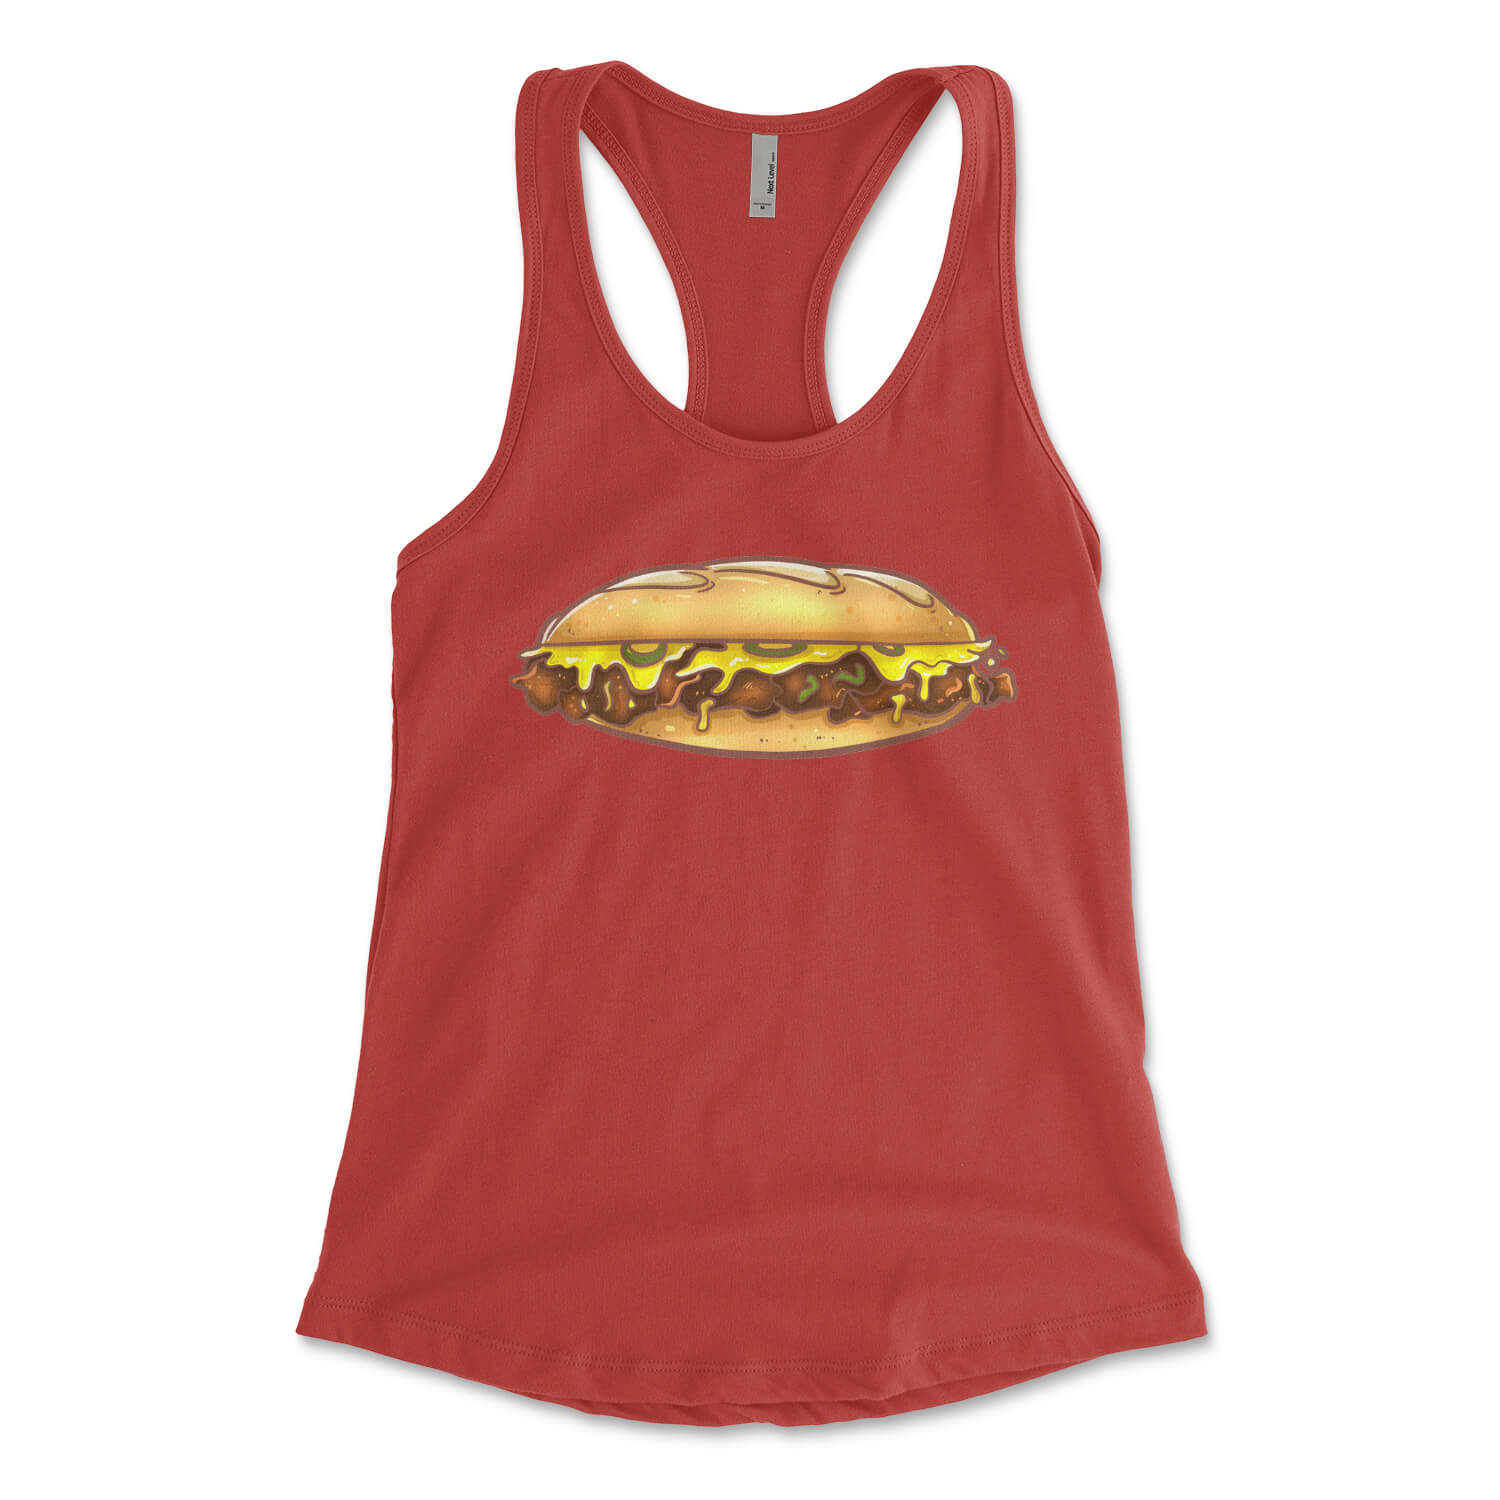 Philly cheesesteak red womens racerback tank top from Phillygoat